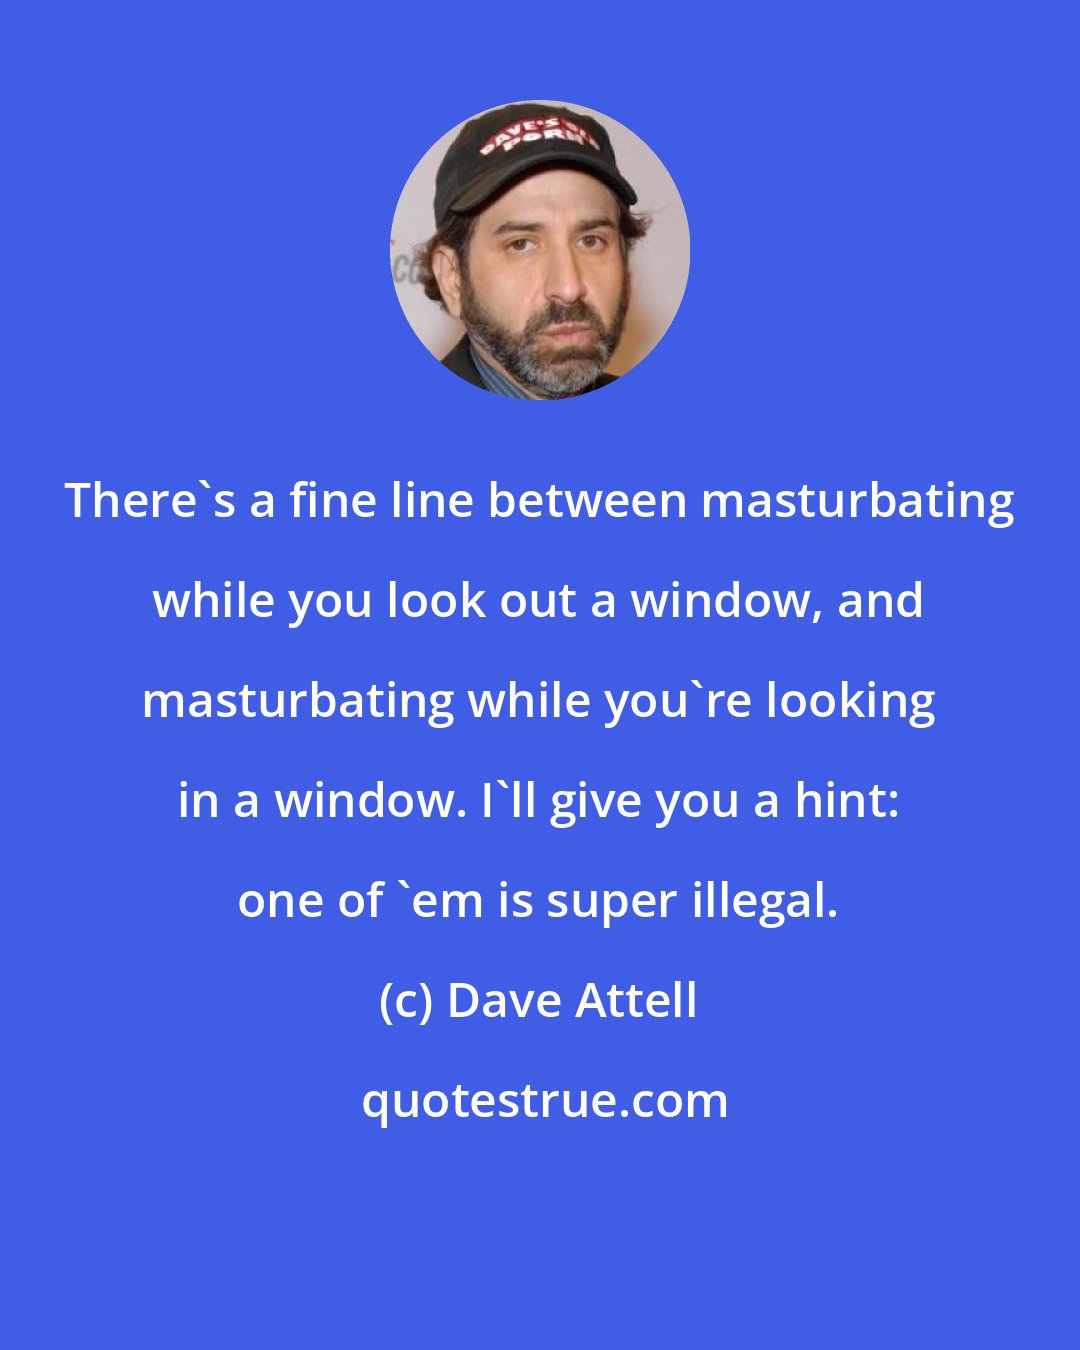 Dave Attell: There's a fine line between masturbating while you look out a window, and masturbating while you're looking in a window. I'll give you a hint: one of 'em is super illegal.